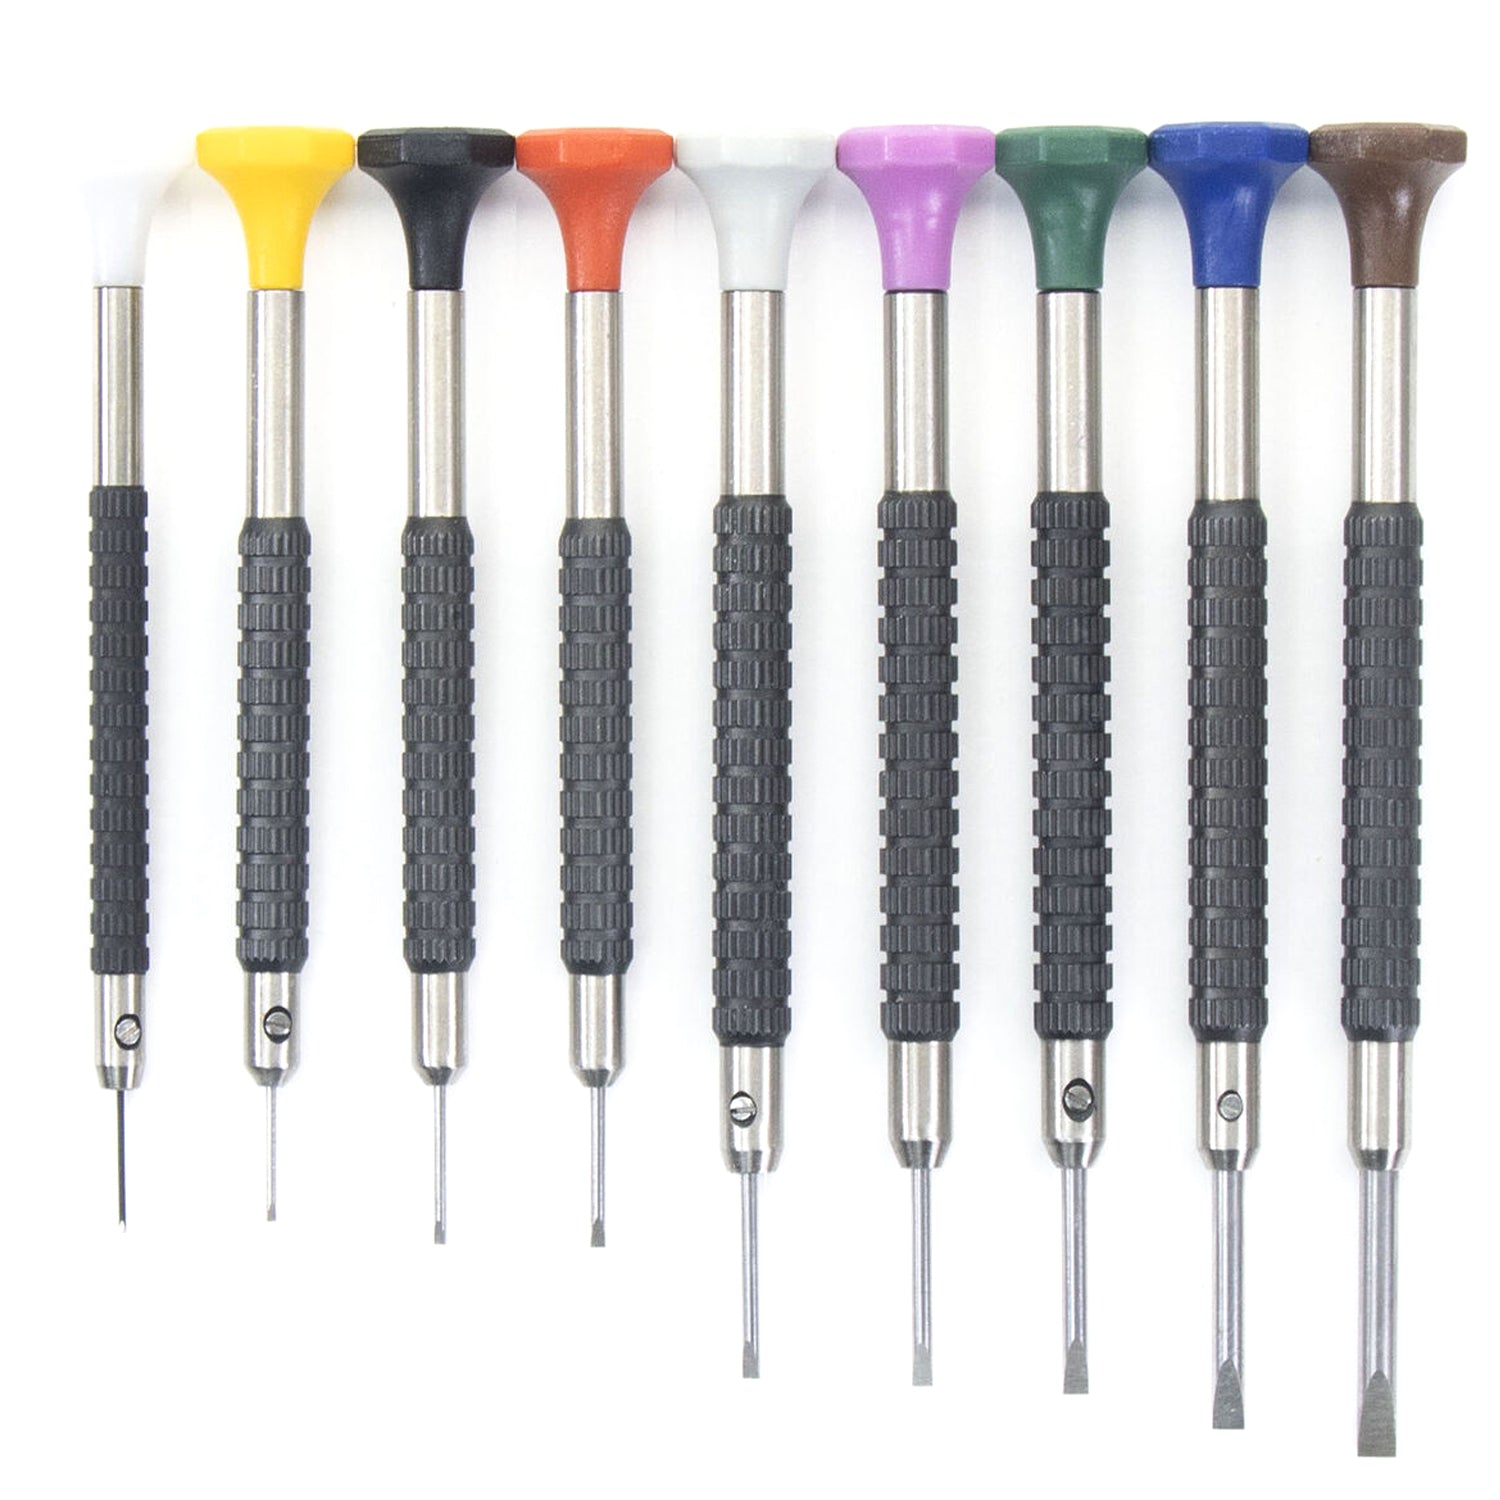 SD-550, Set of 9 Flat Head Screwdrivers with Spare Blades